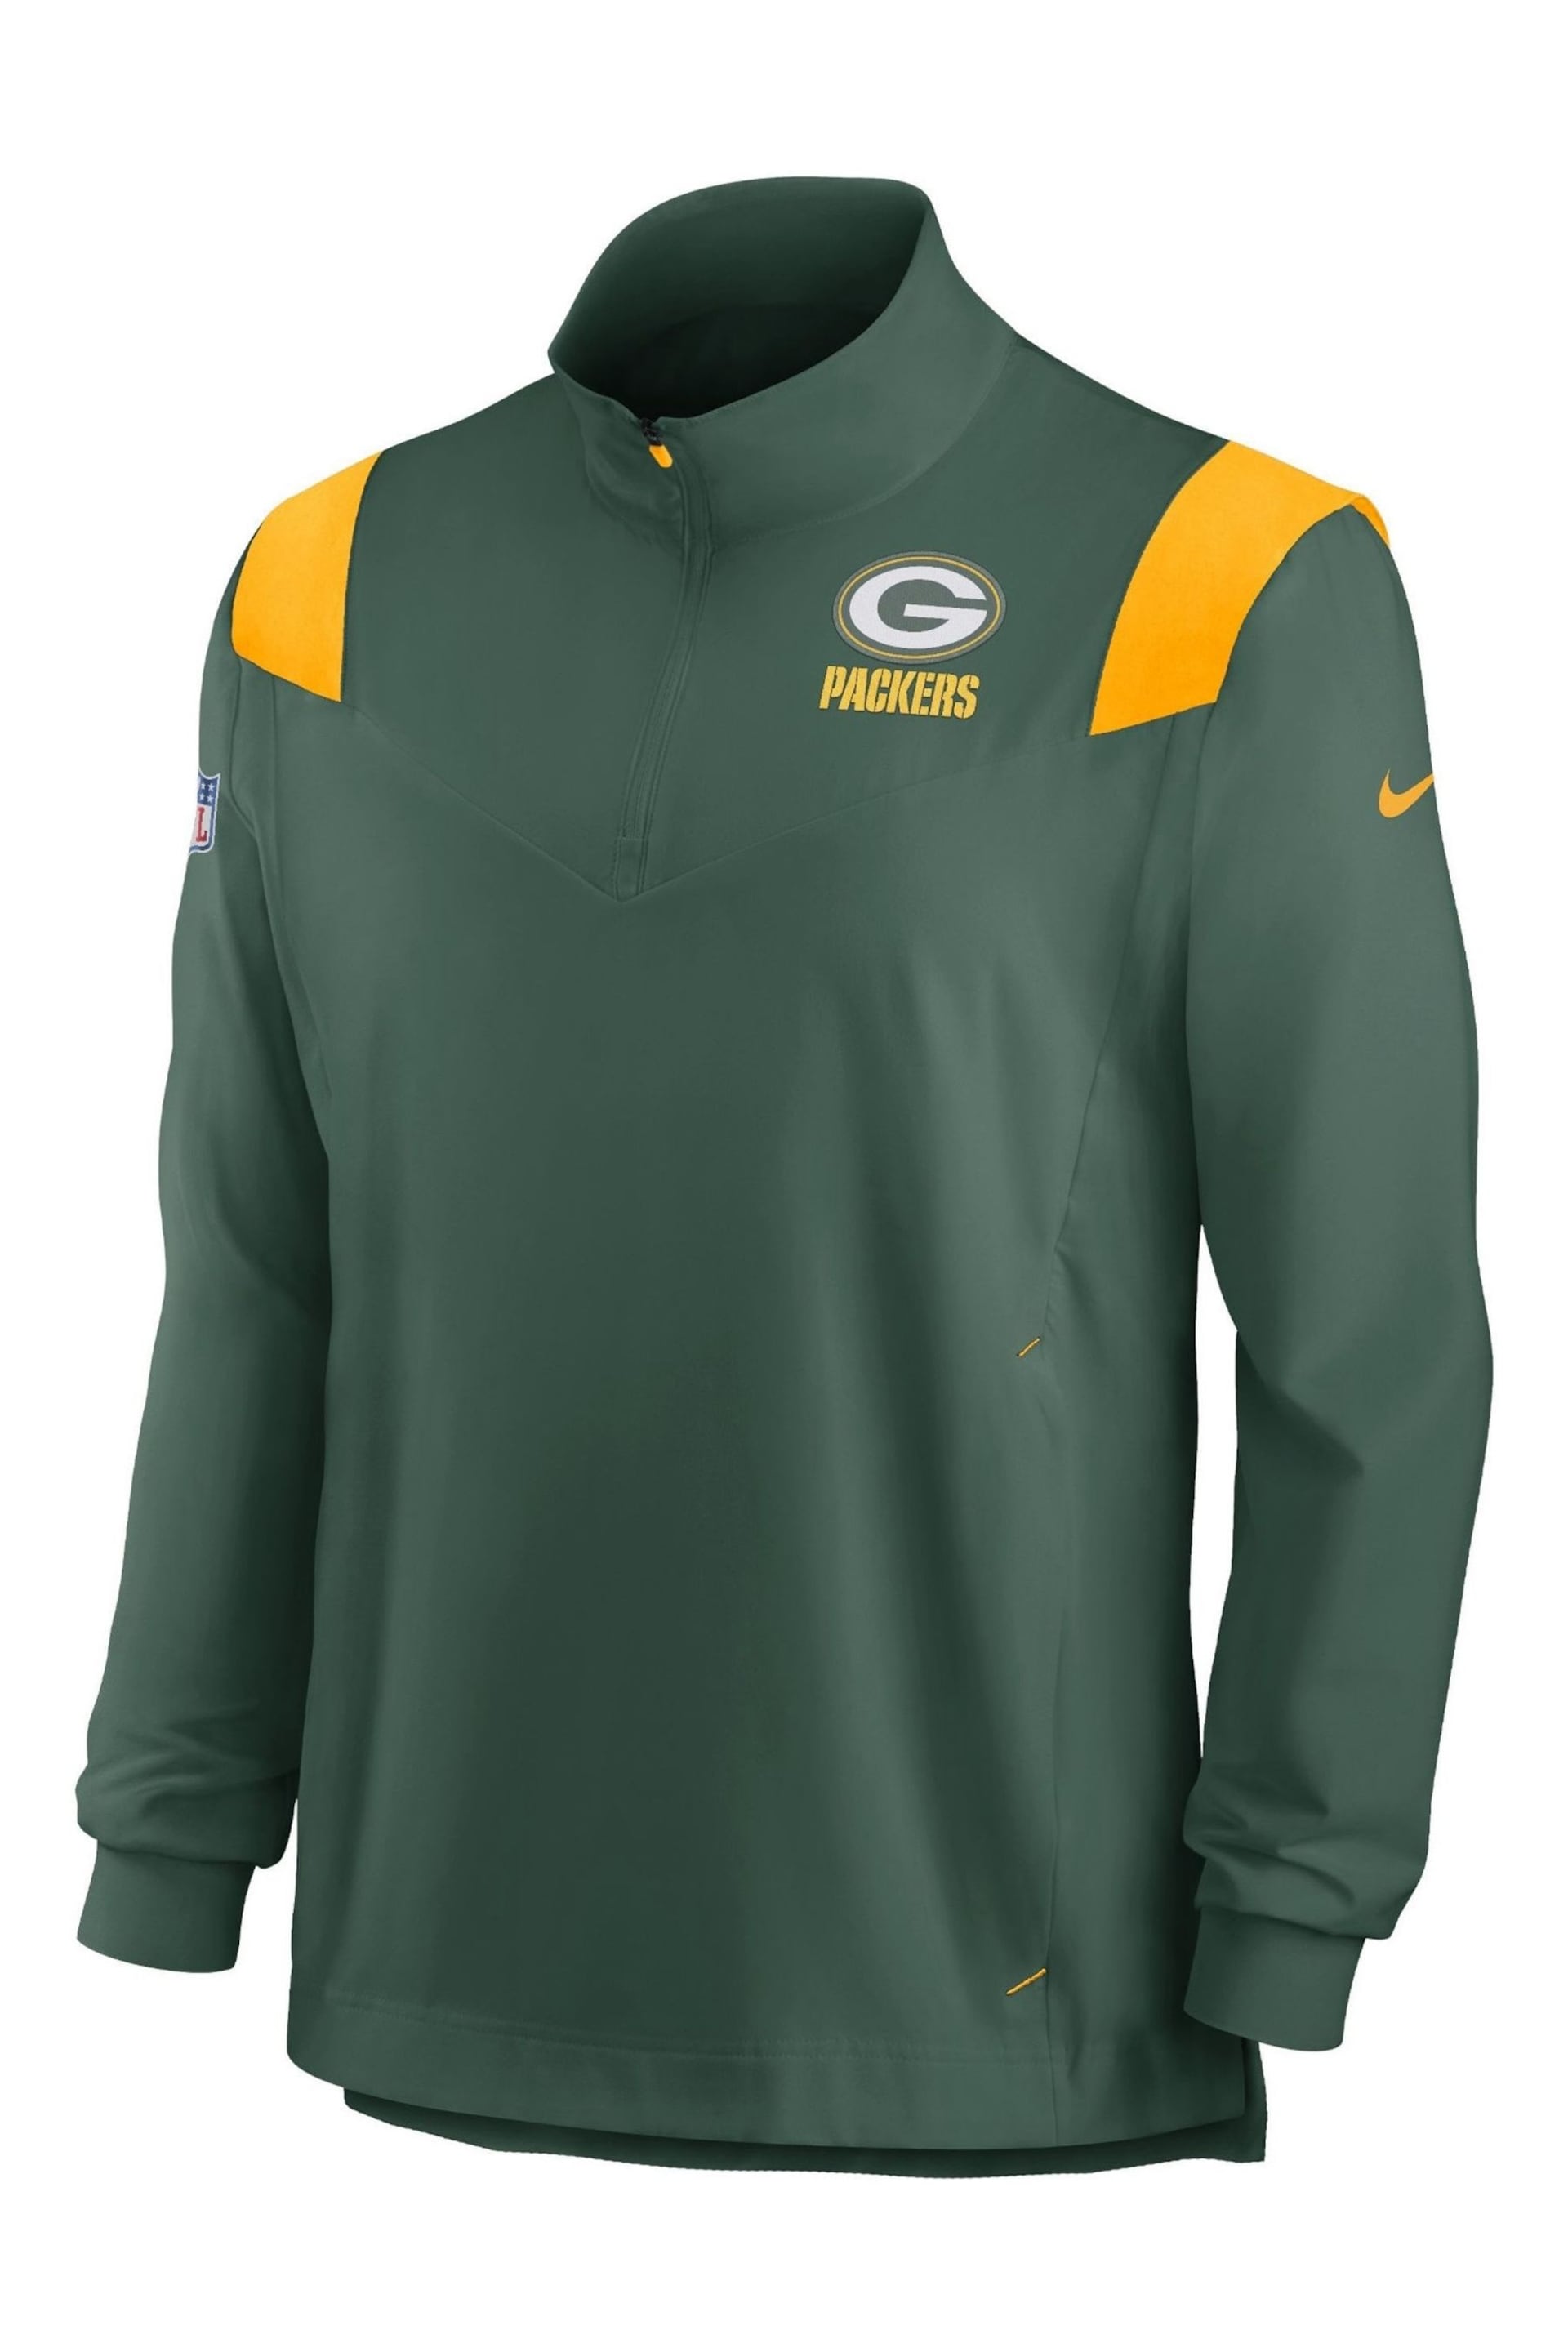 Nike Green NFL Fanatics Mens Bay Packers Repel Lightweight Coach Long Sleeve Sweat Top - Image 2 of 3